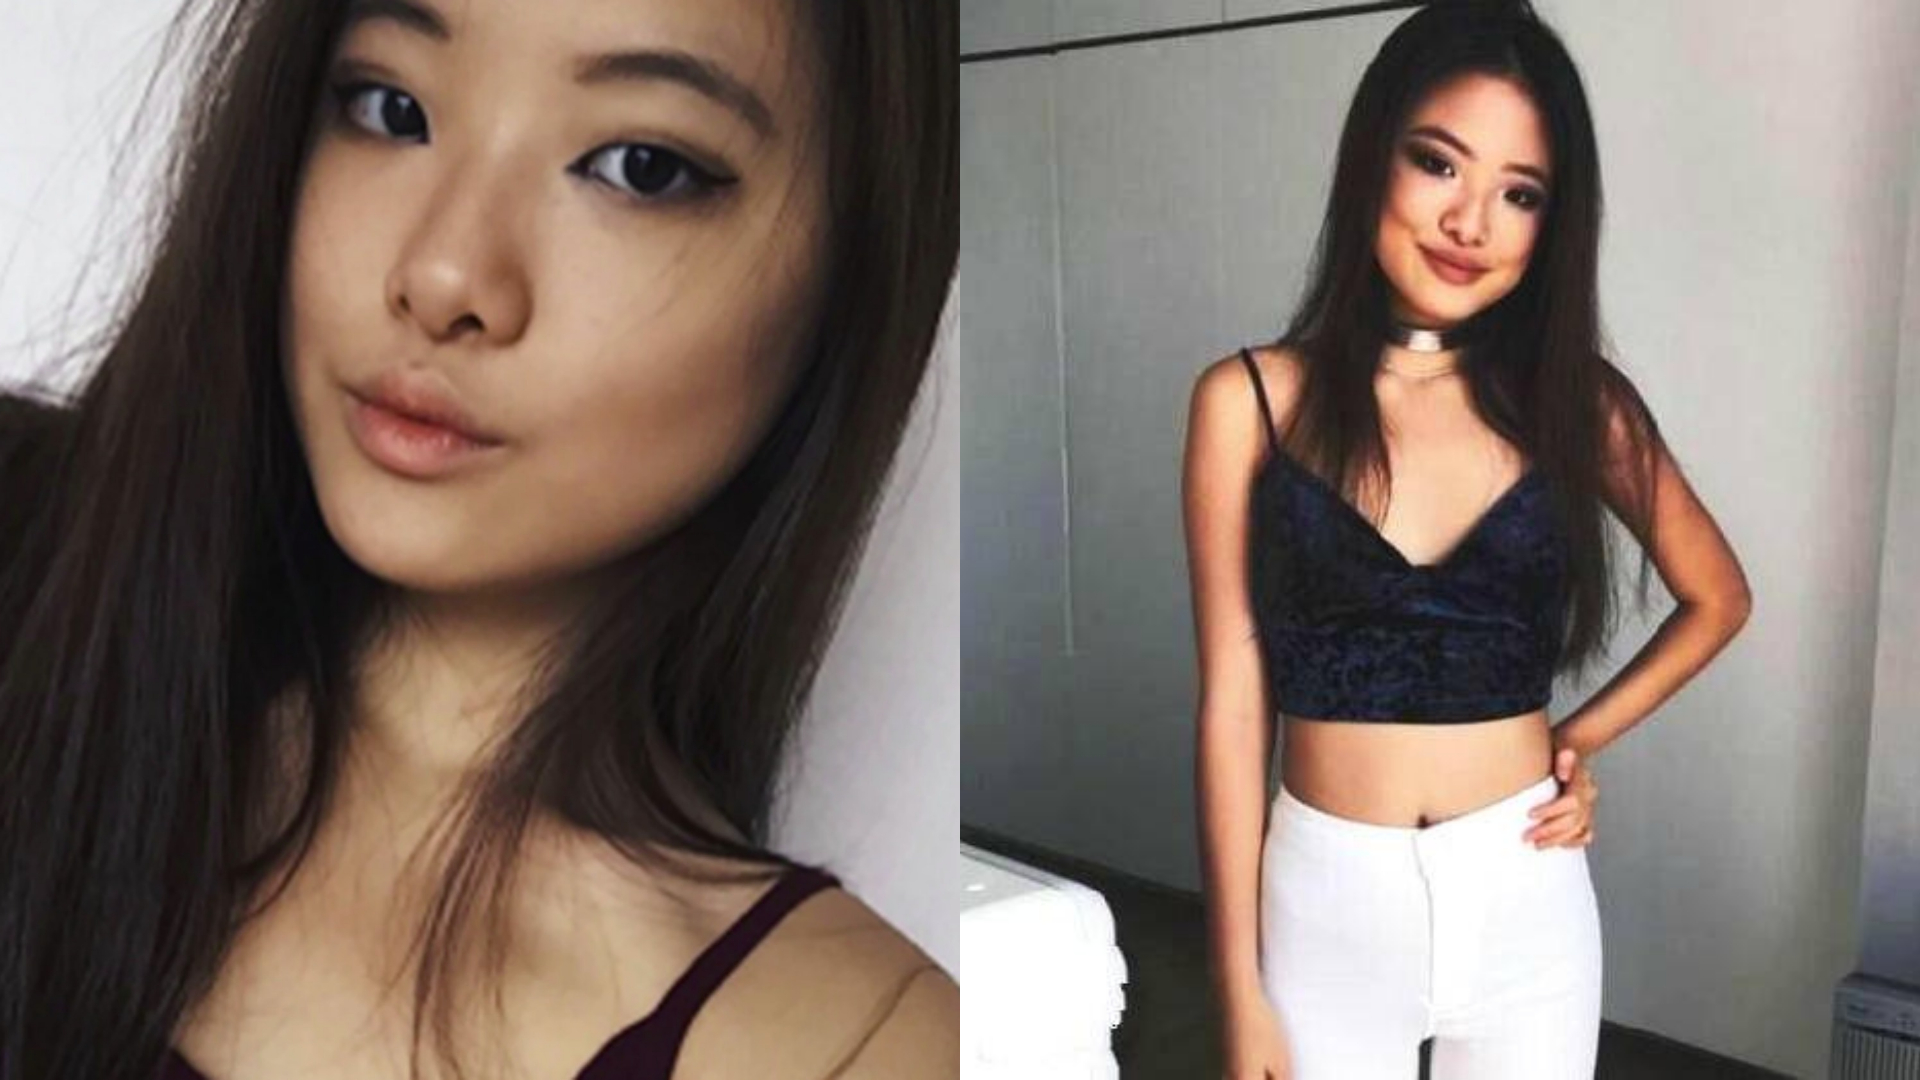 Jacky’s older daughter Zoe, 21, is said to resemble a young Shu Qi